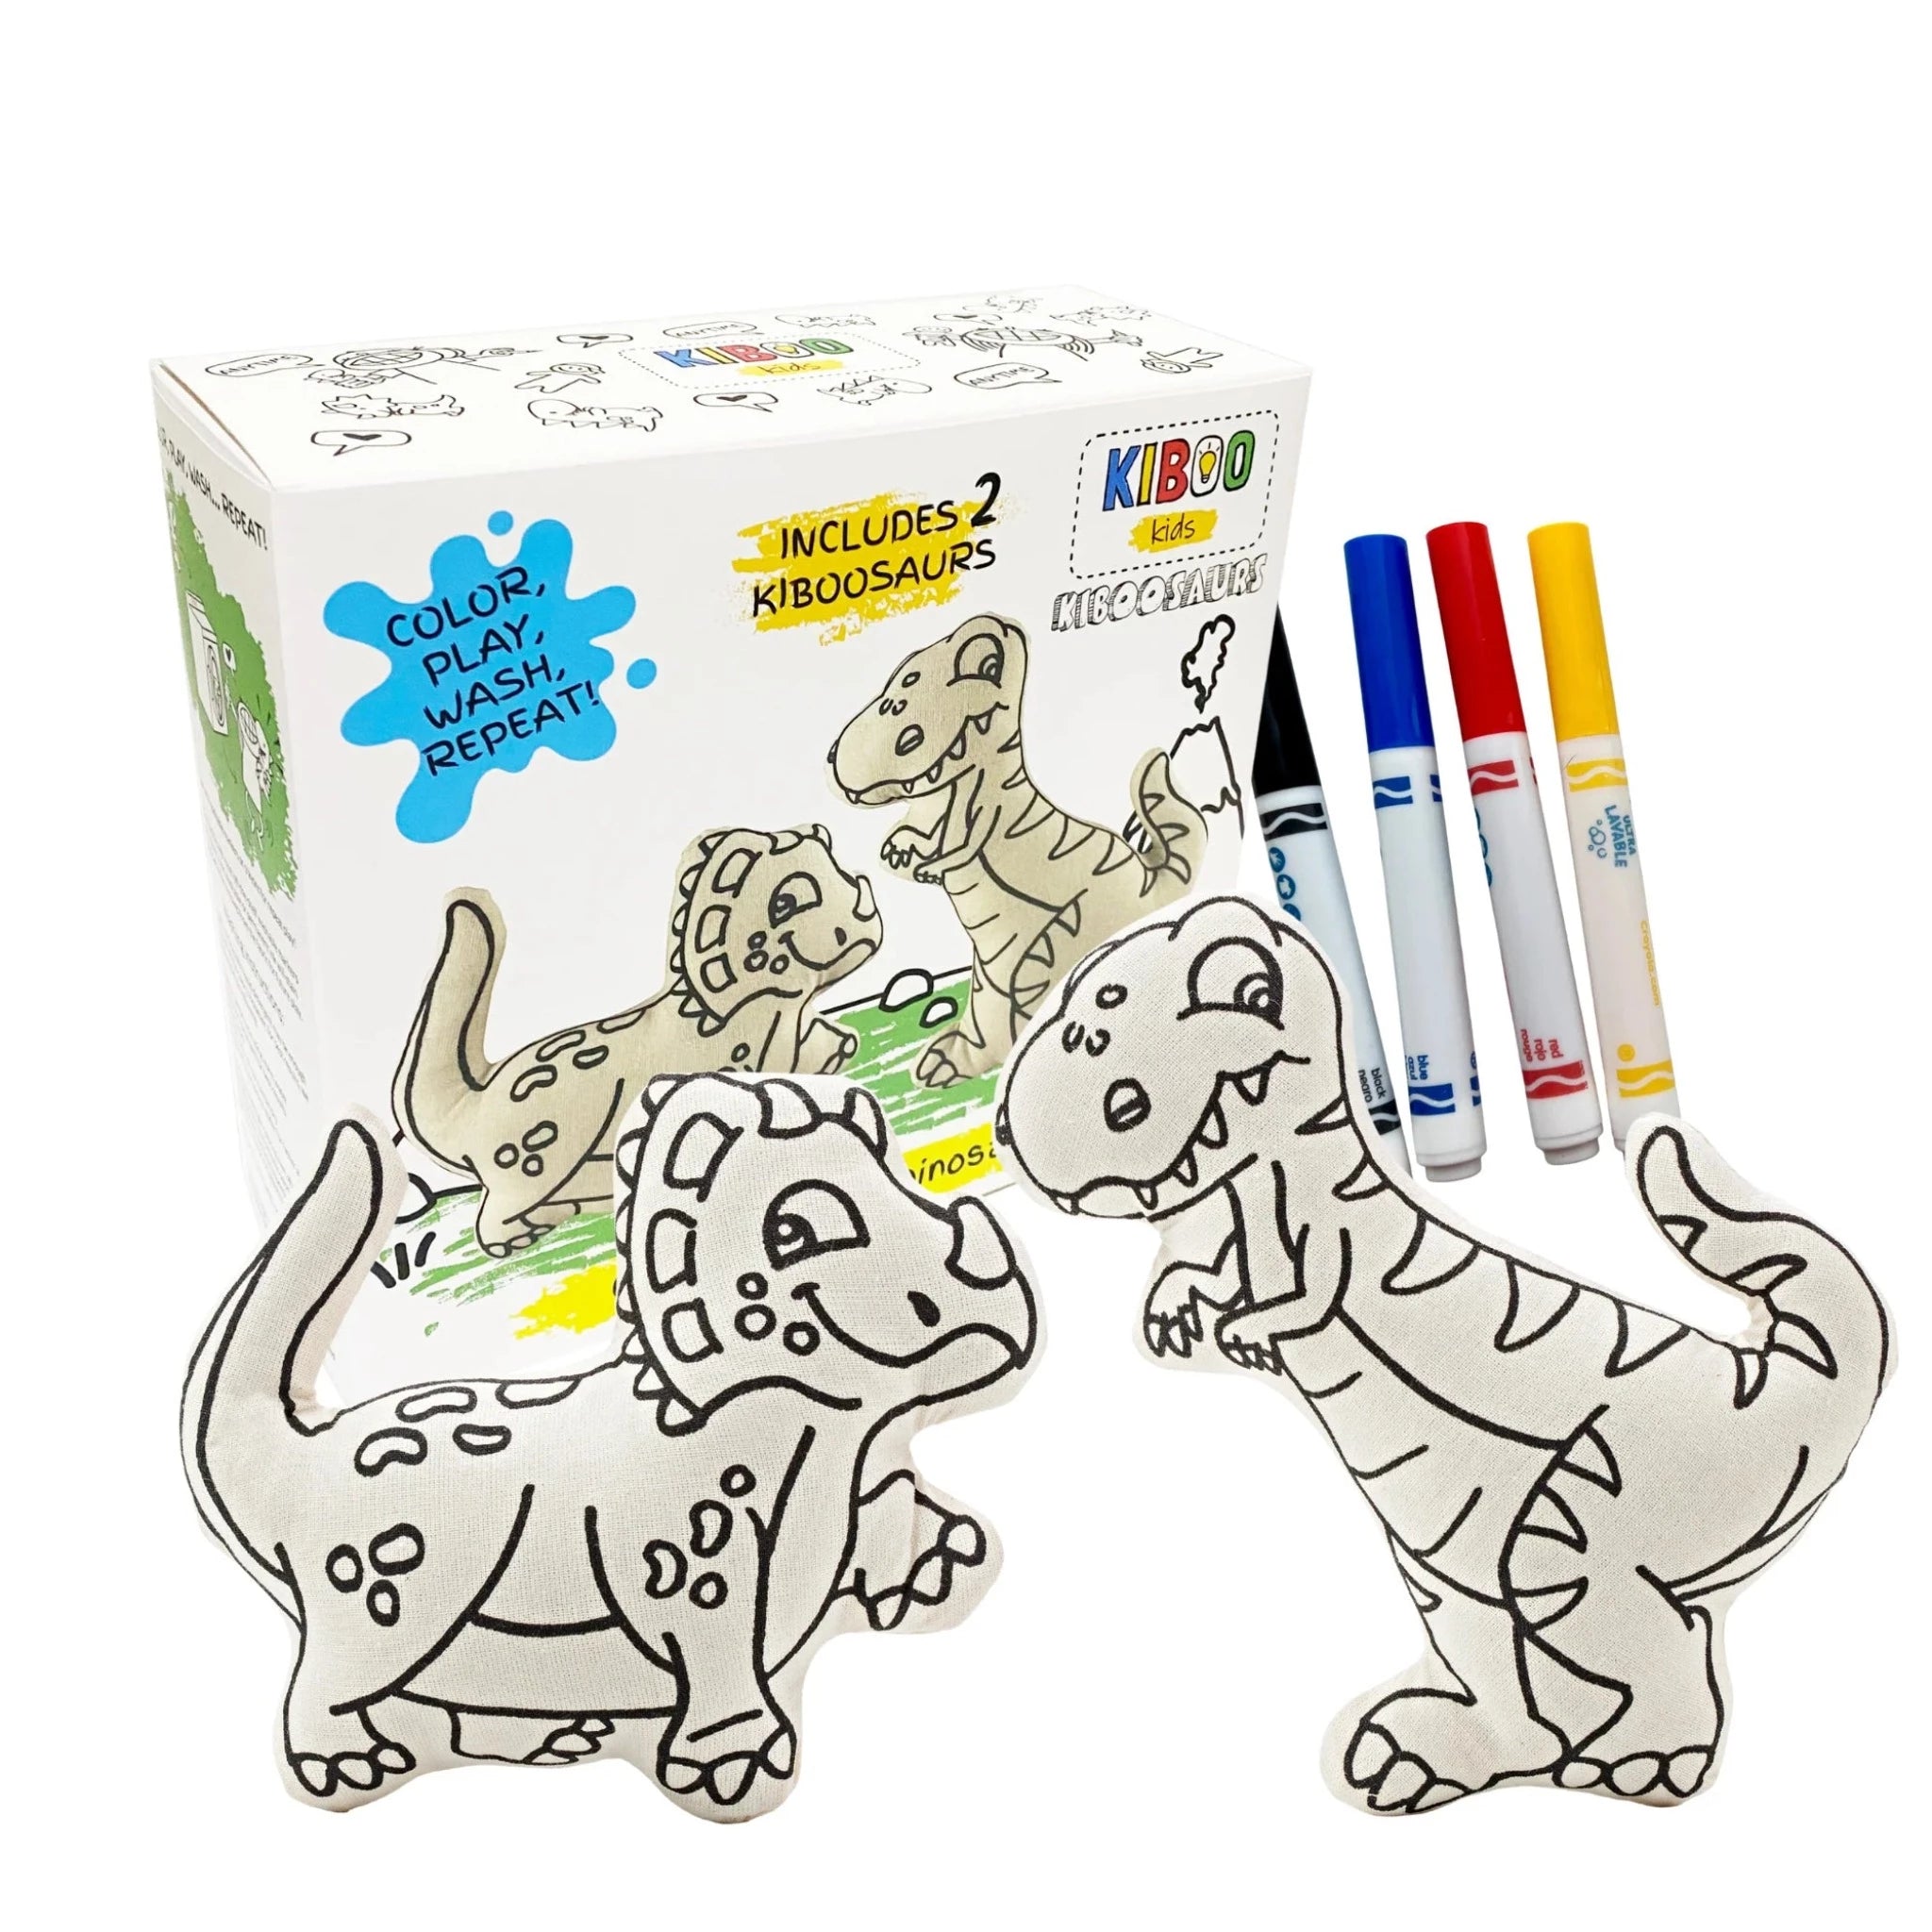 Colorable Play Dinosaurs Set